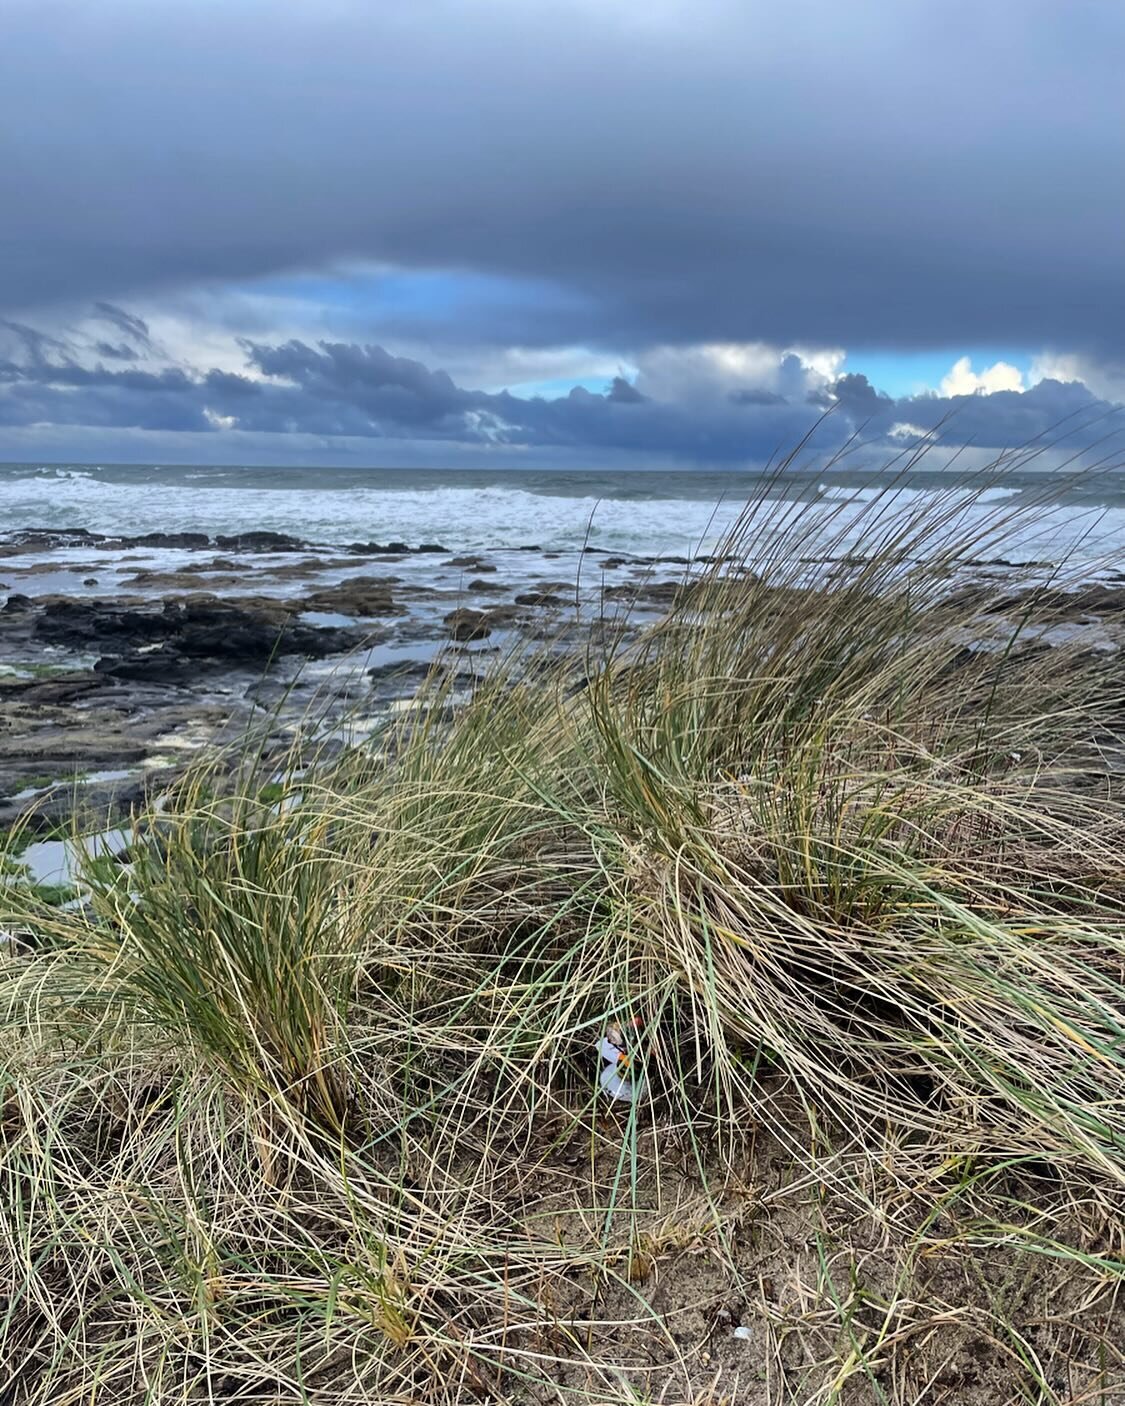 Yachats Mushroom Treasure Hunt

3/2/24 Mushroom Treasure Hunt Hint:
Yachats weather is always full of surprises. Wind, rain, hail, sun, snow. We get it all! Find a bench on Ocean View Dr to watch all the weather roll by. 

Responsible recreation is k